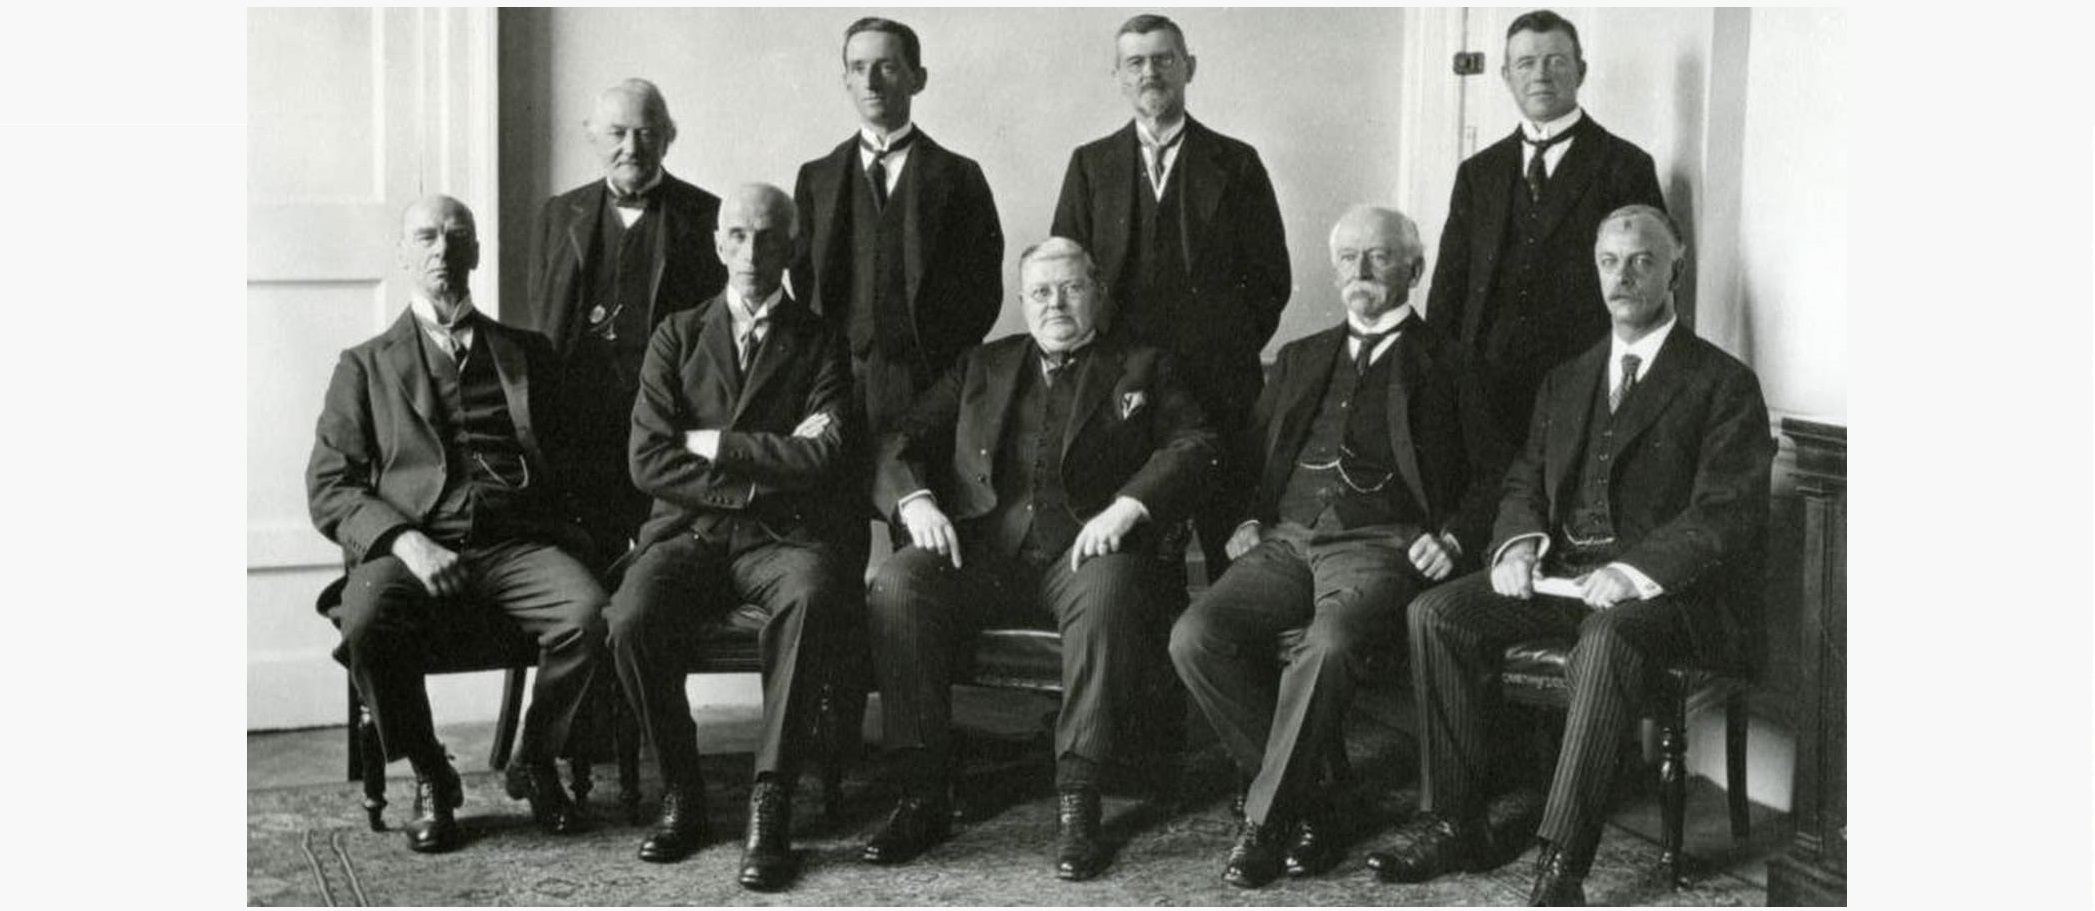 Members of the High Court and Supreme Court in 1924